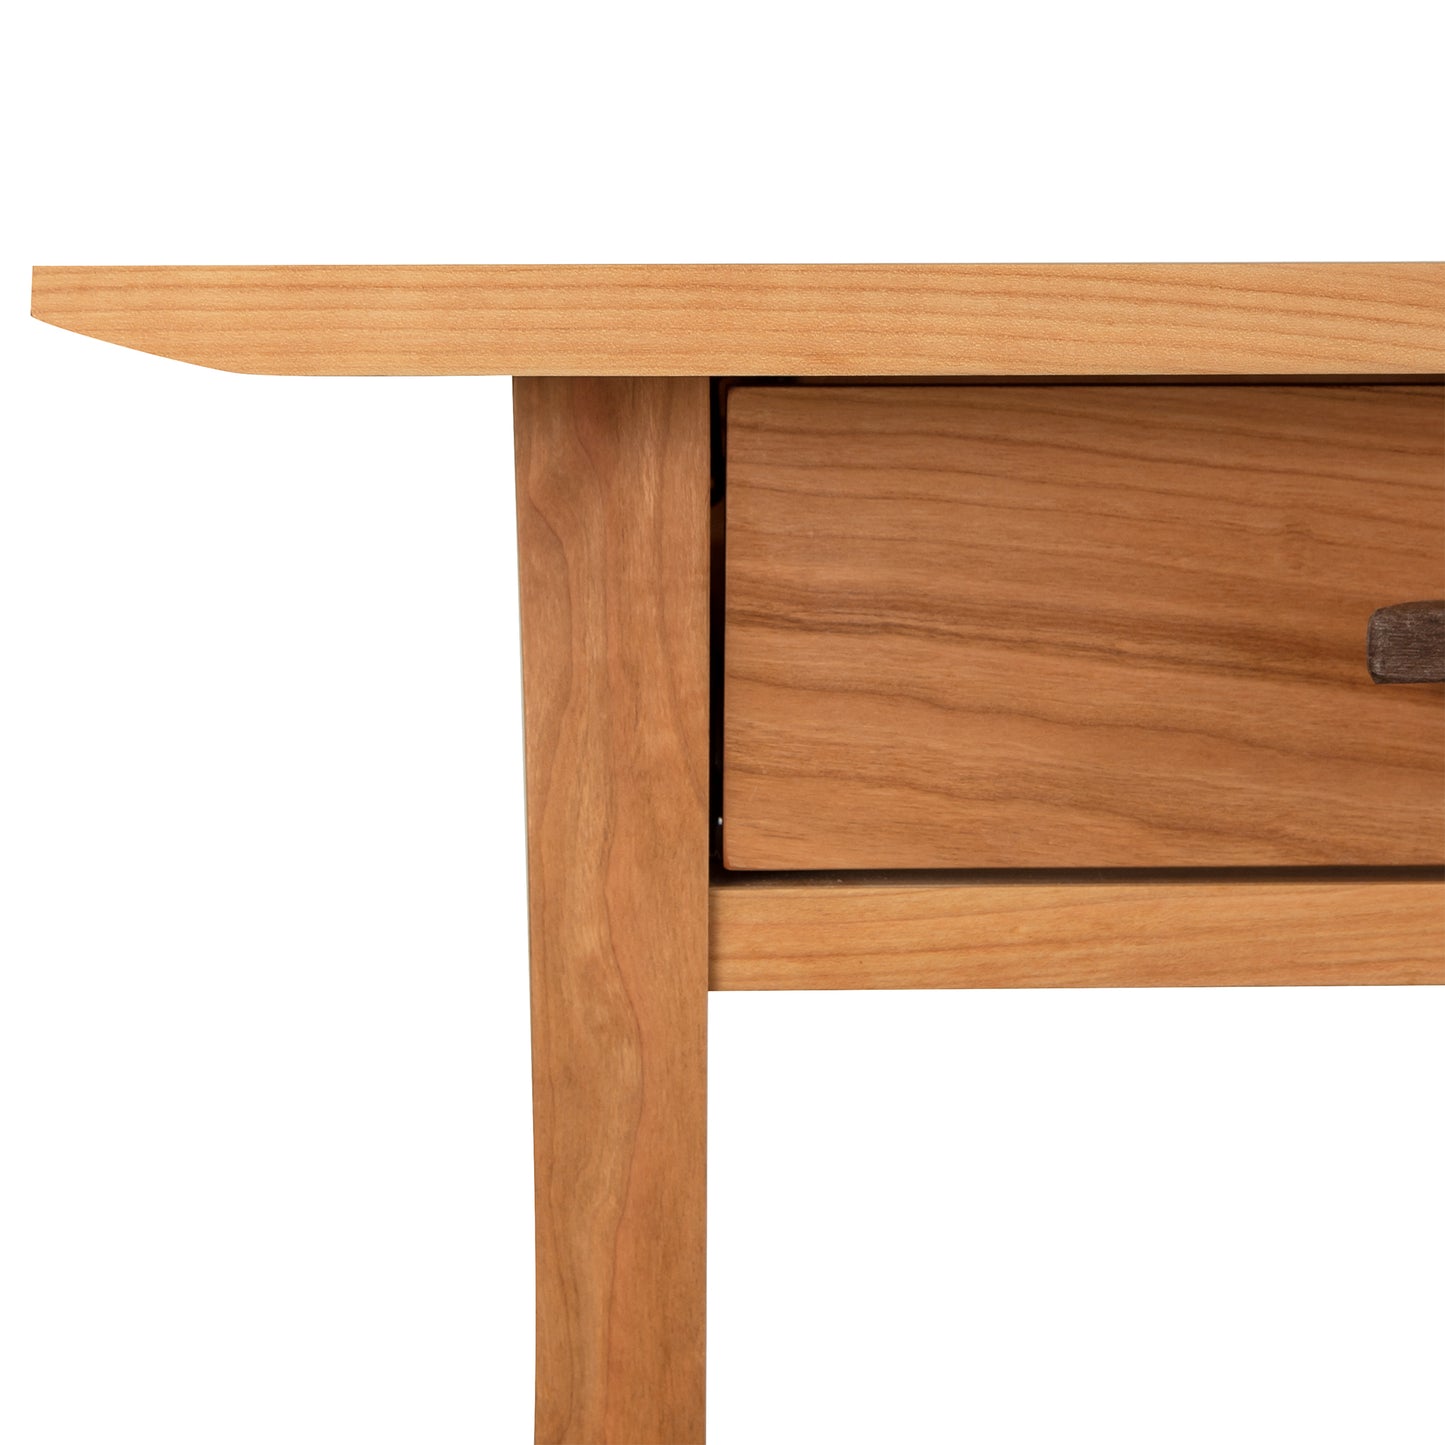 A close up of a Vermont Furniture Designs Contemporary Craftsman Library Desk with a drawer.